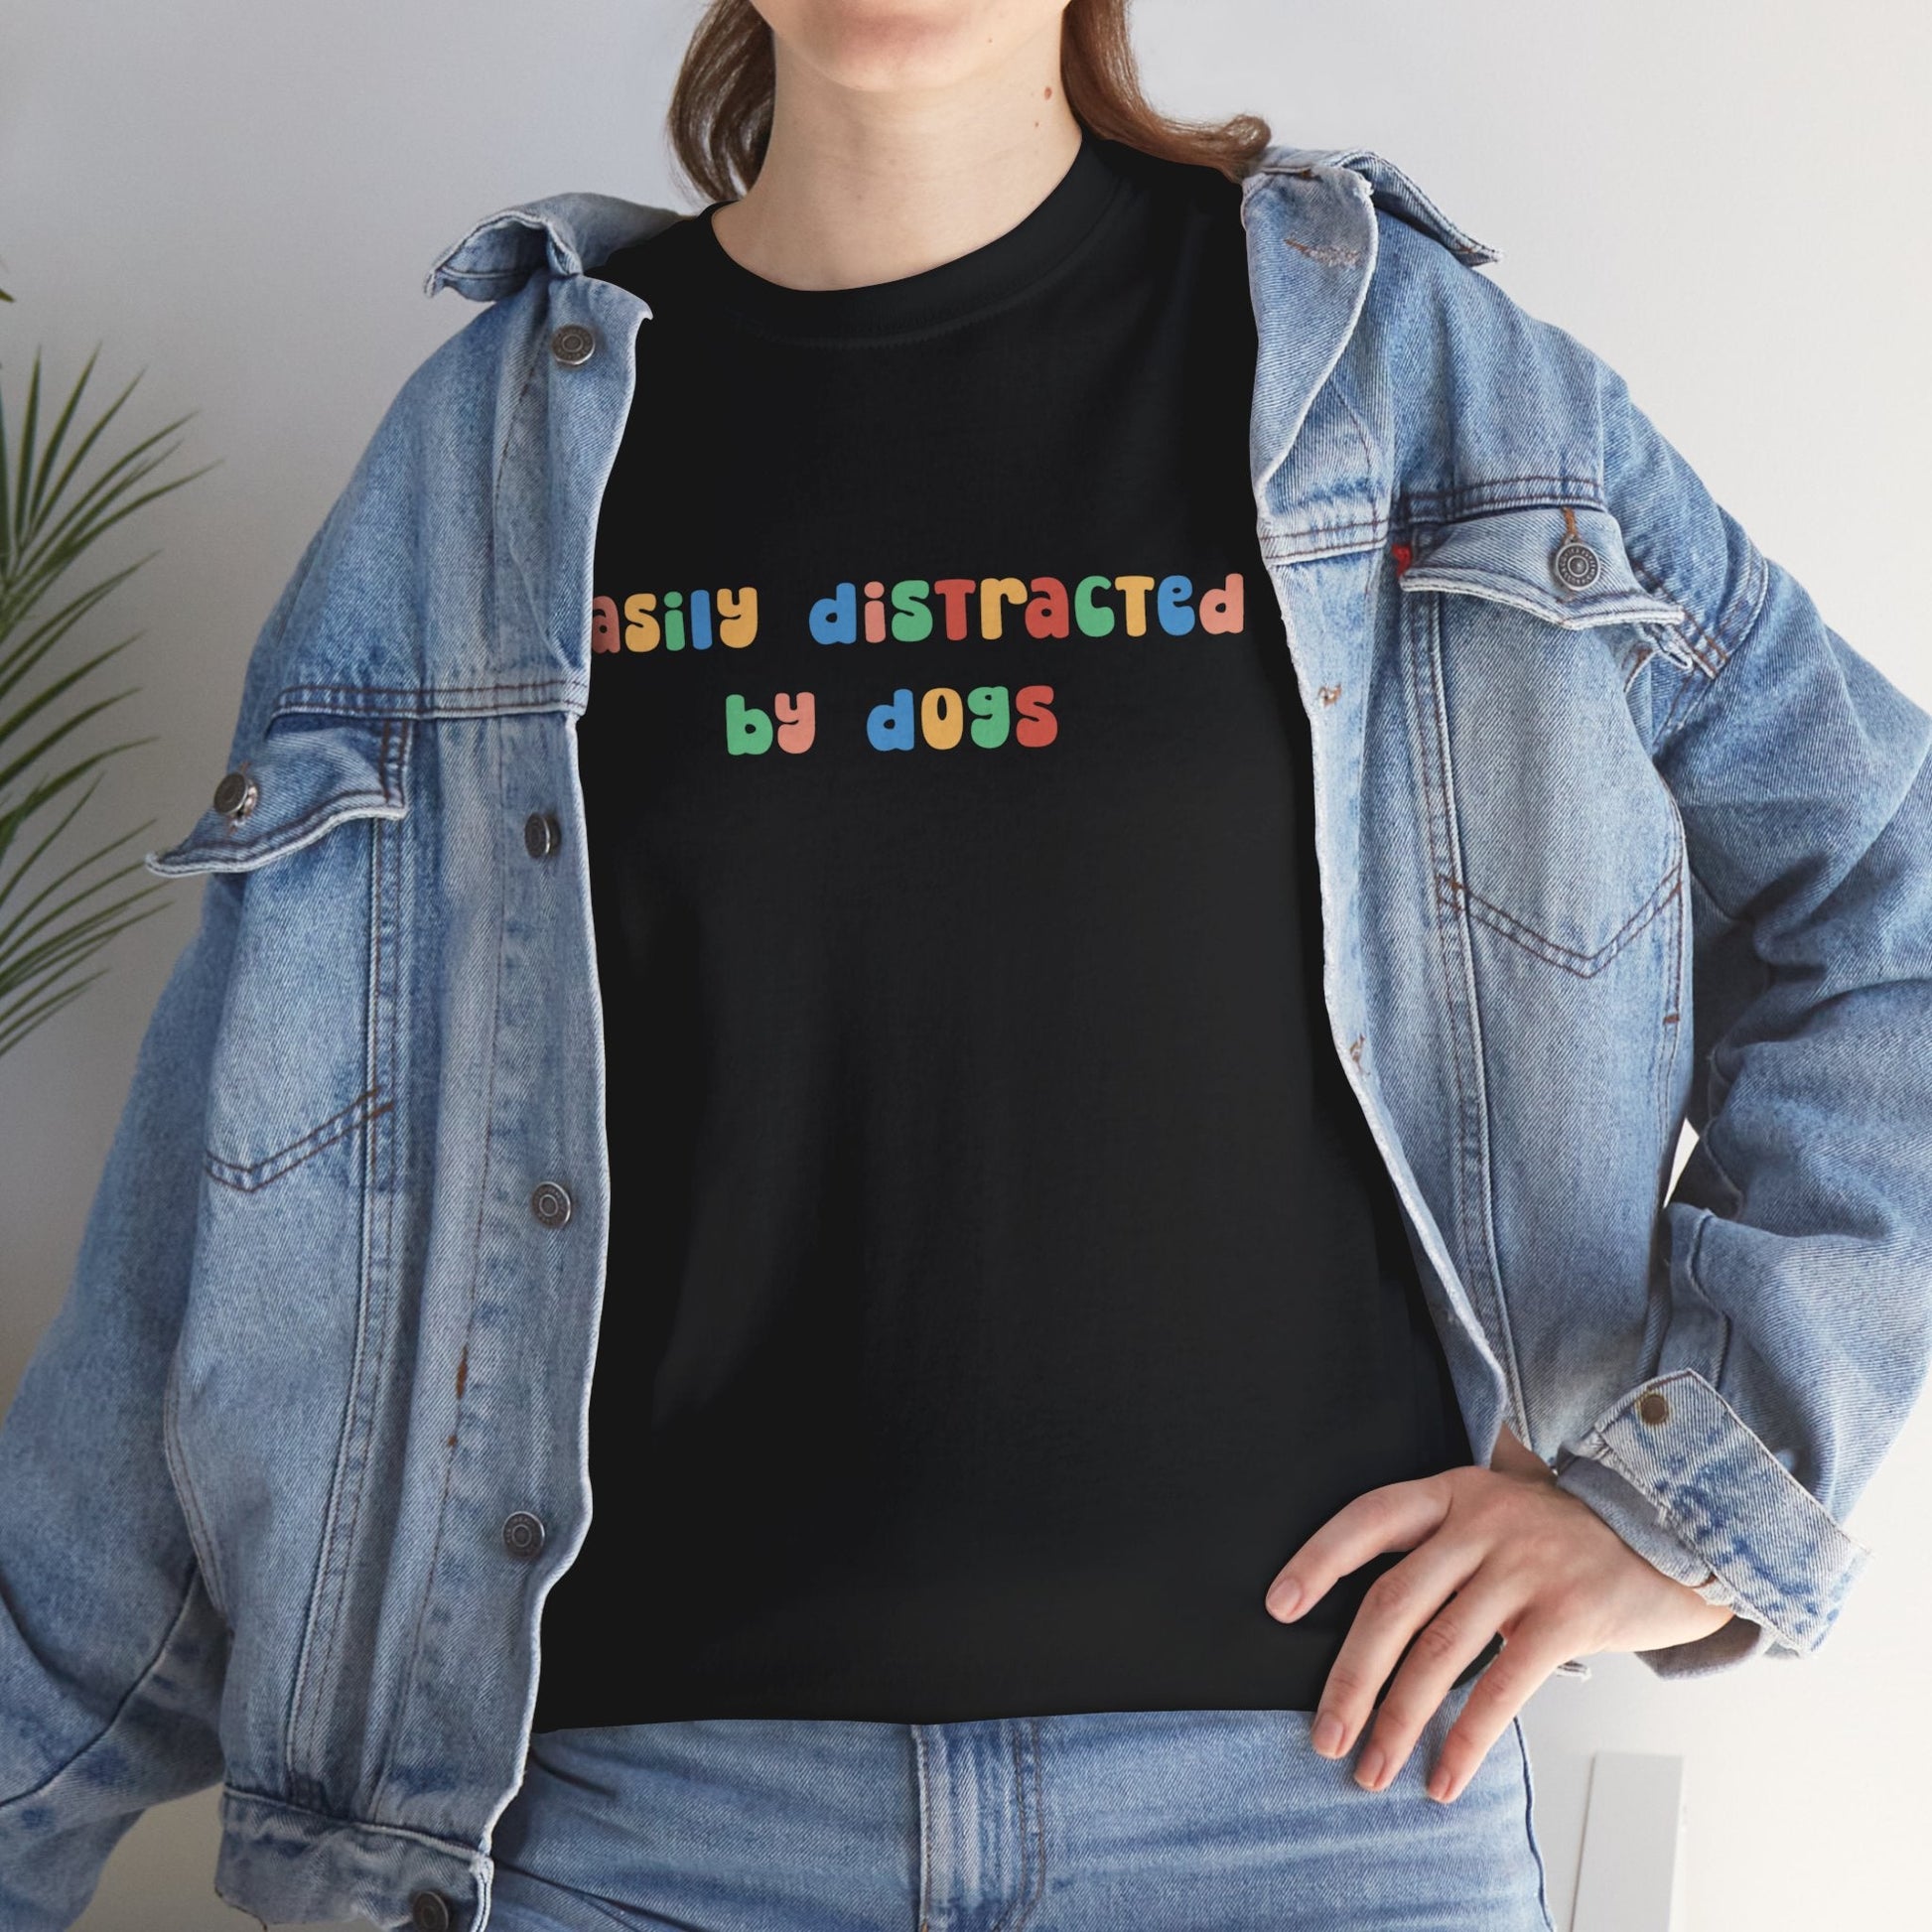 Easily Distracted By Dogs | Text Tees - Detezi Designs-77694054942507942221